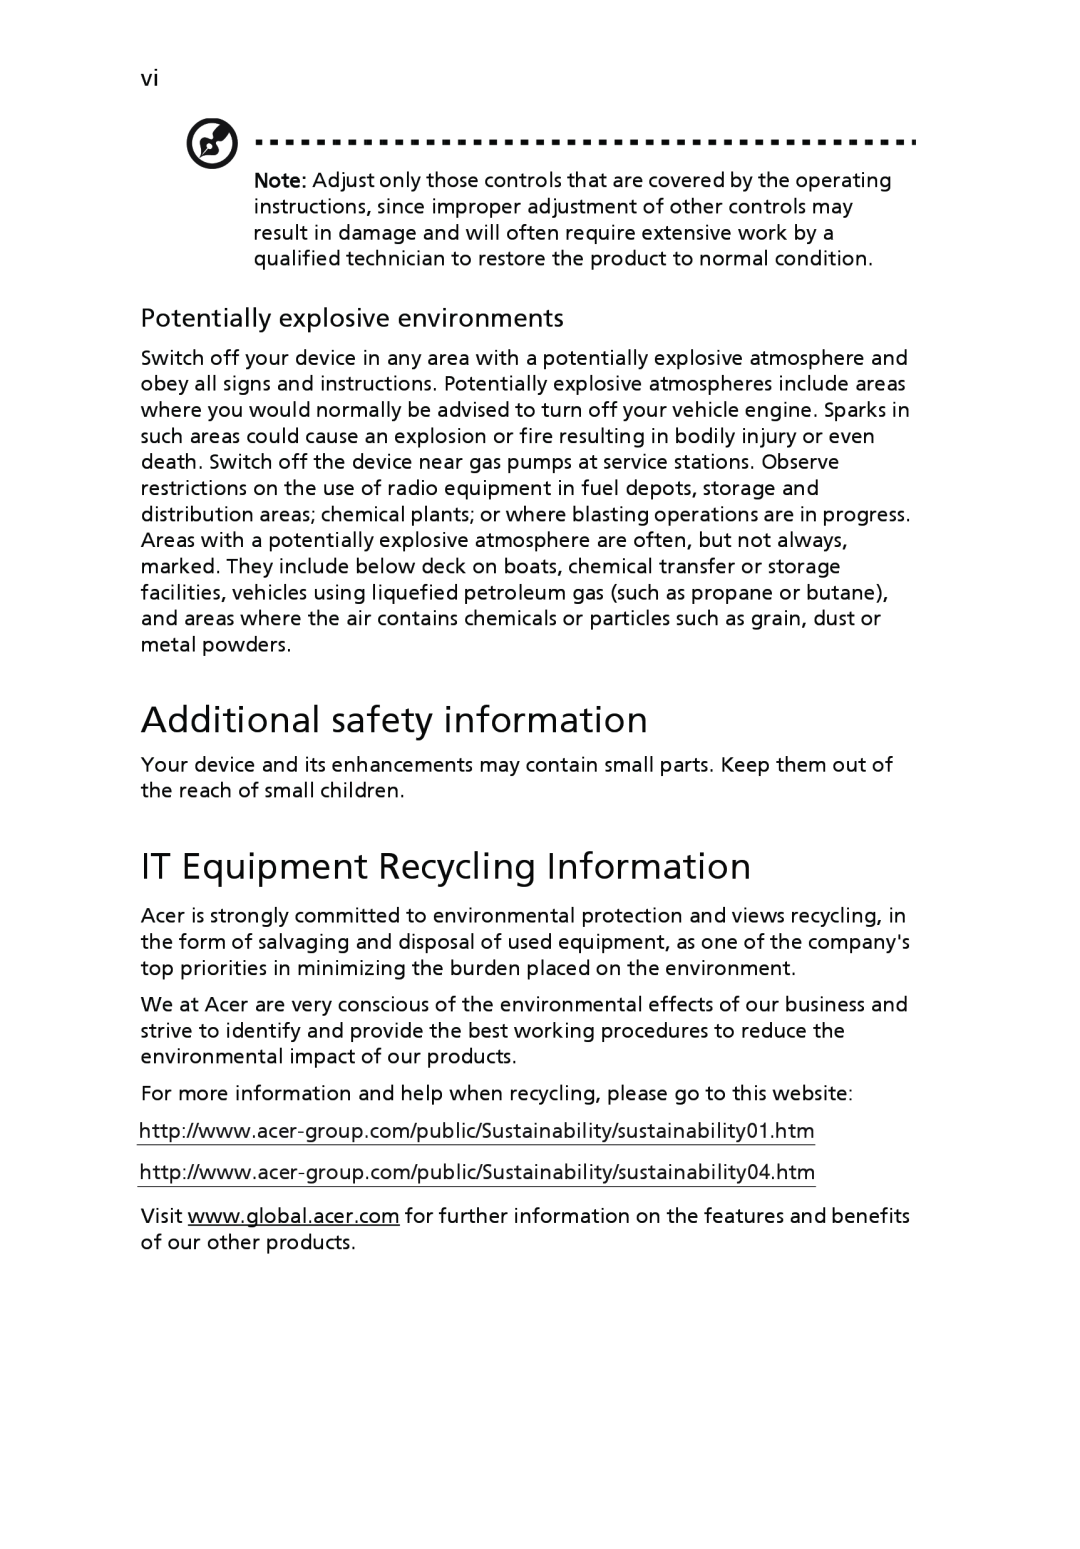 Acer V193L manual Additional safety information, IT Equipment Recycling Information, Potentially explosive environments 